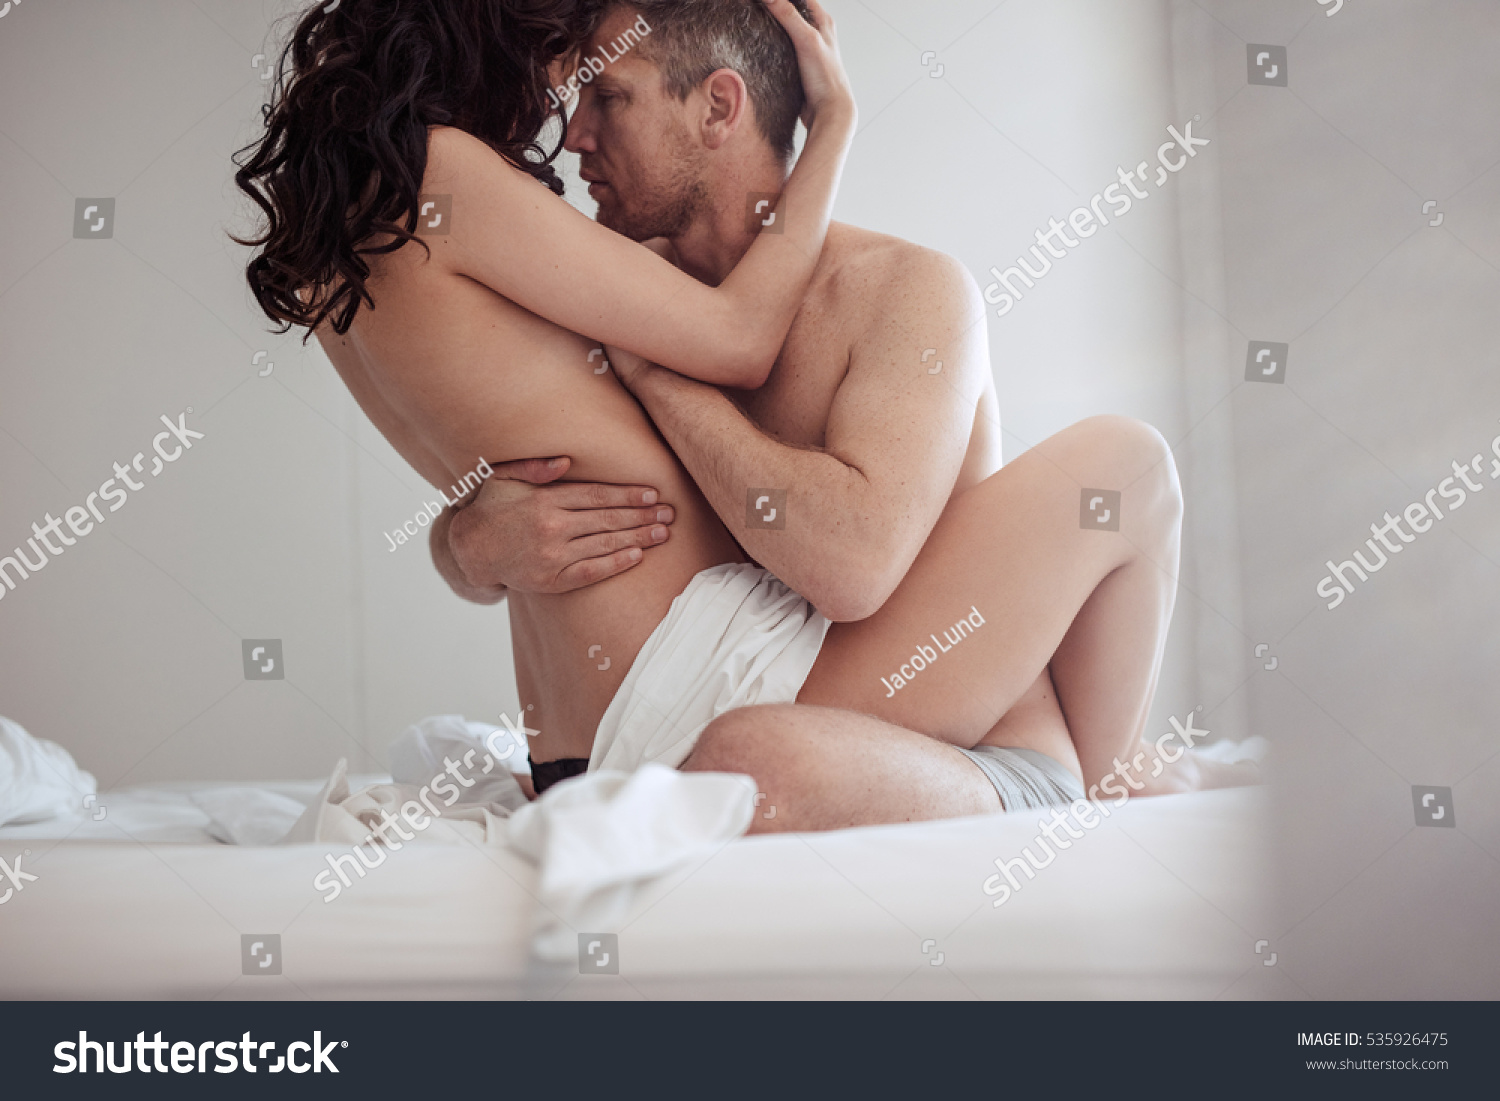 Making Love And Having Sex 55